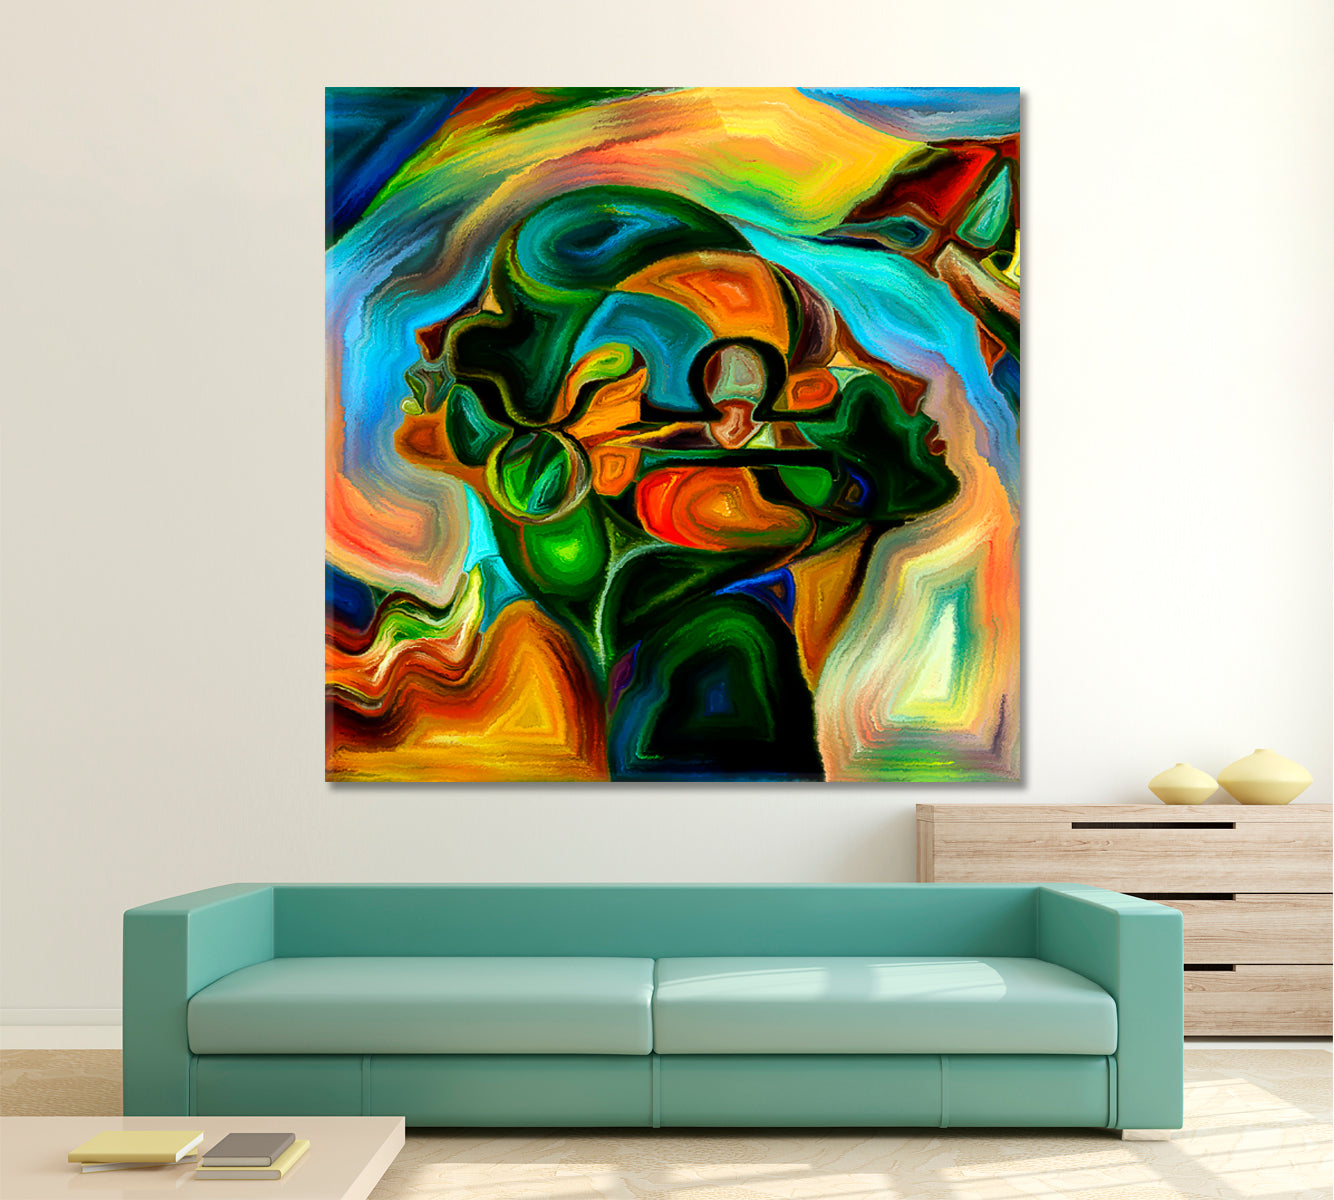 LIVE COLORS You and I Woven Together Consciousness - Square Panel Abstract Art Print Artesty   